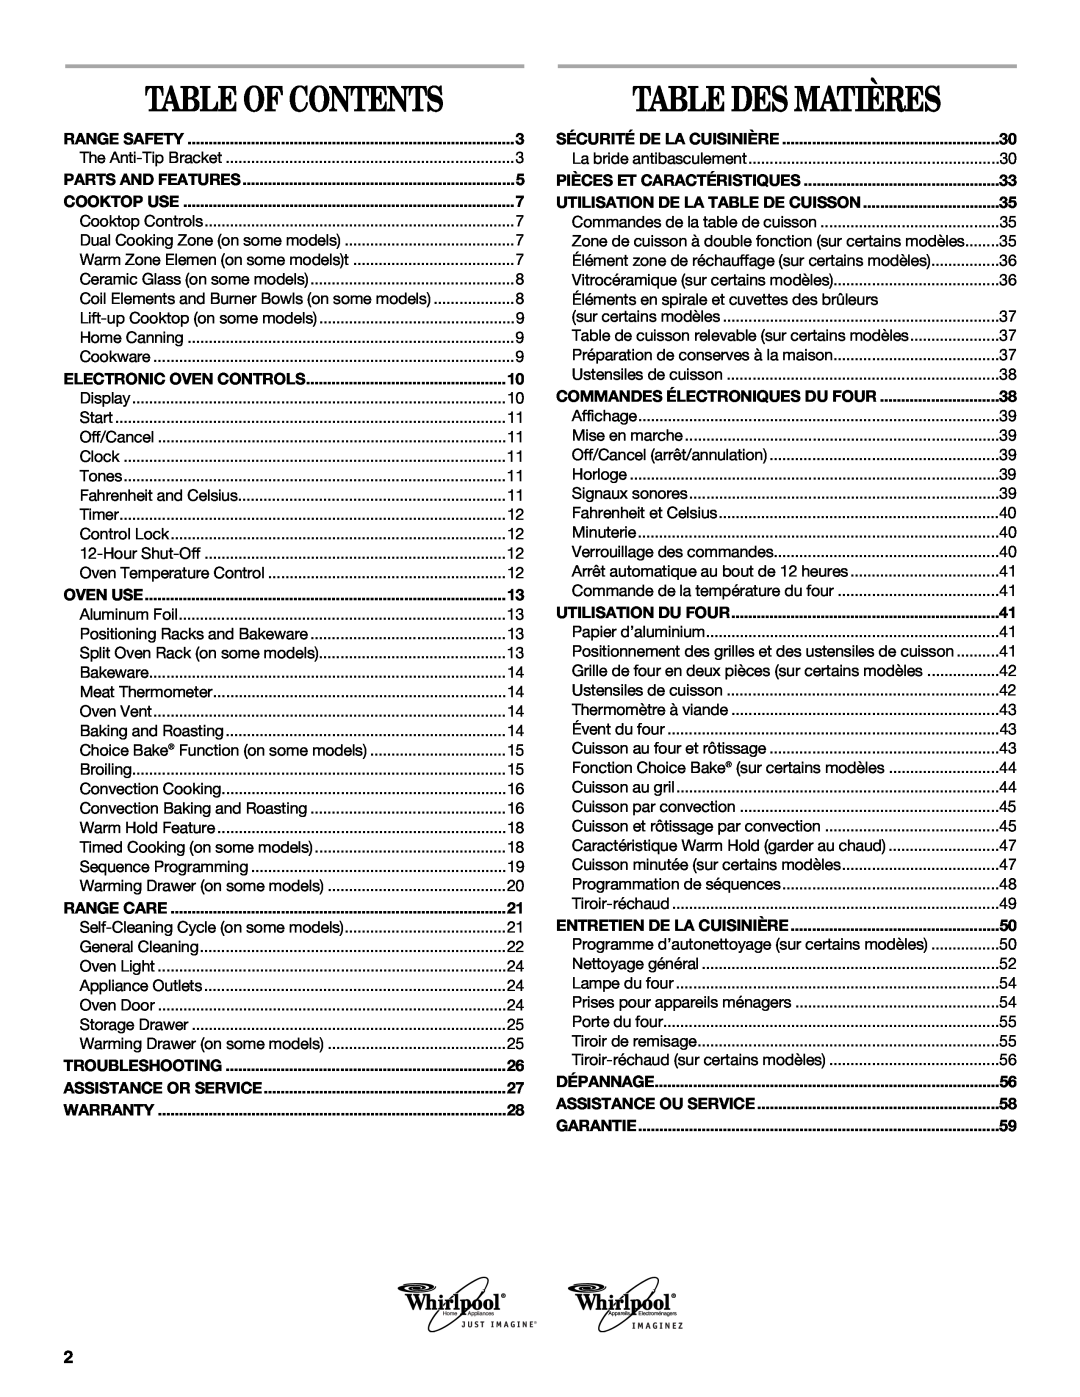 Whirlpool GERC4110PB0 manual Table Des Matières, Table Of Contents 